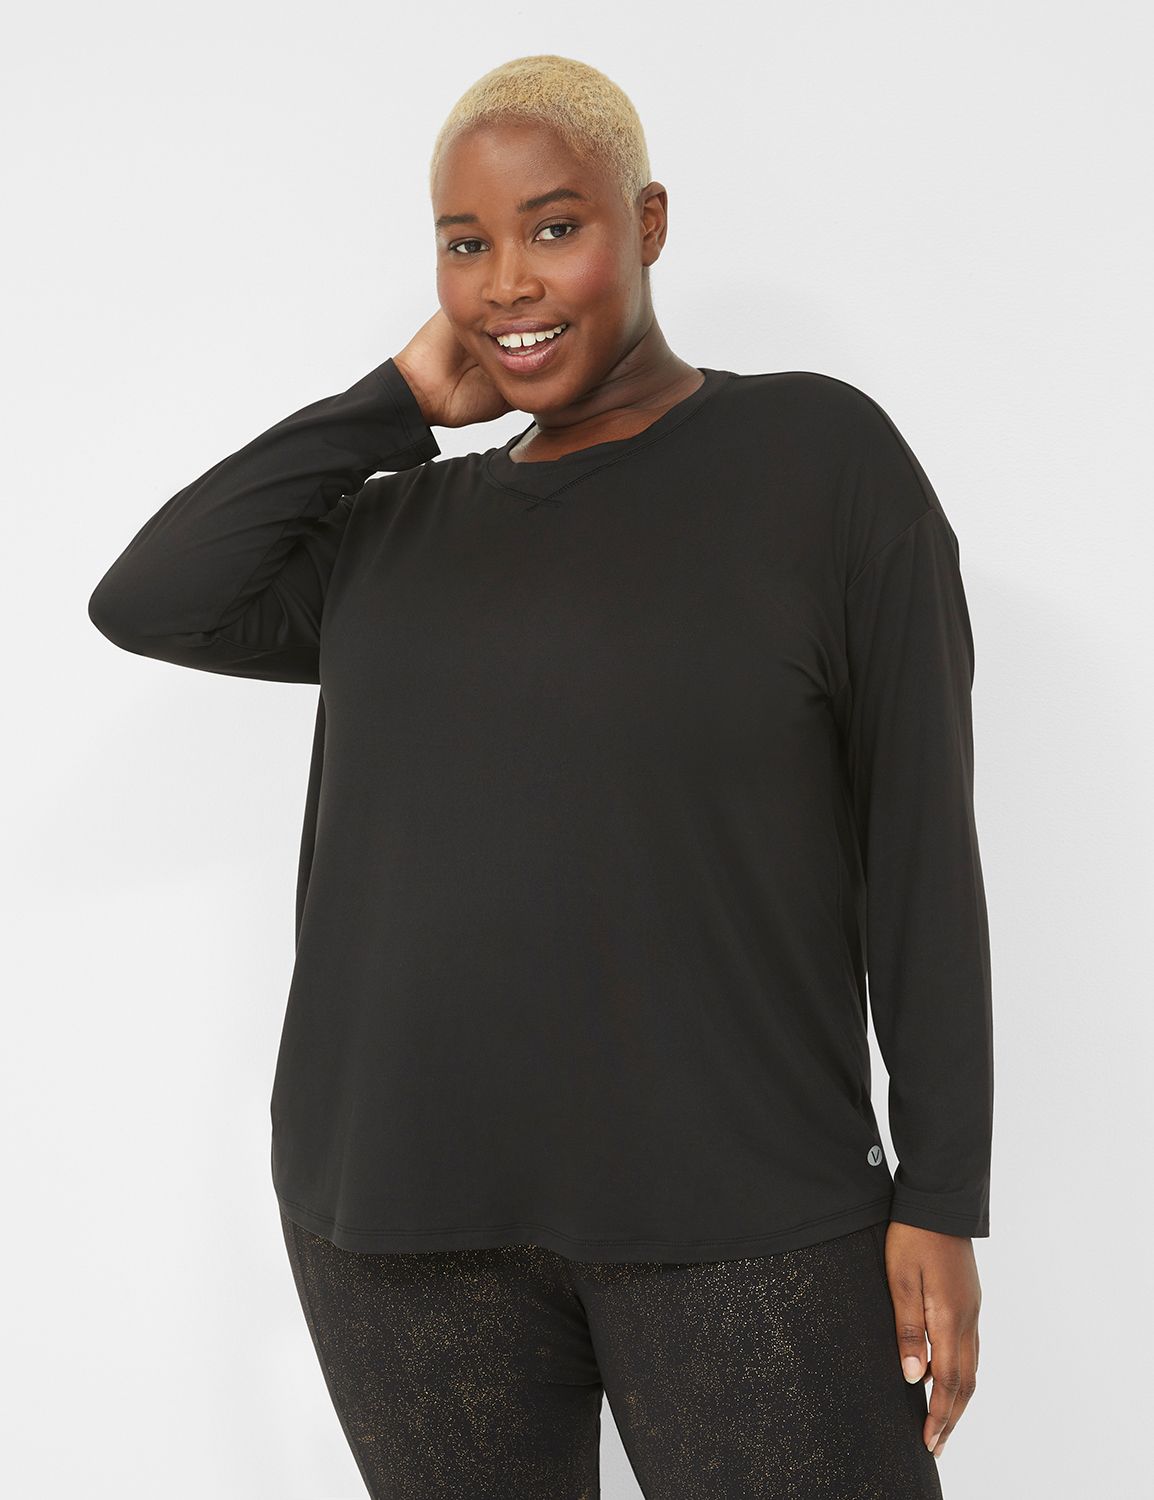 Clearance Plus Size Activewear & Workout Clothes - On Sale Today